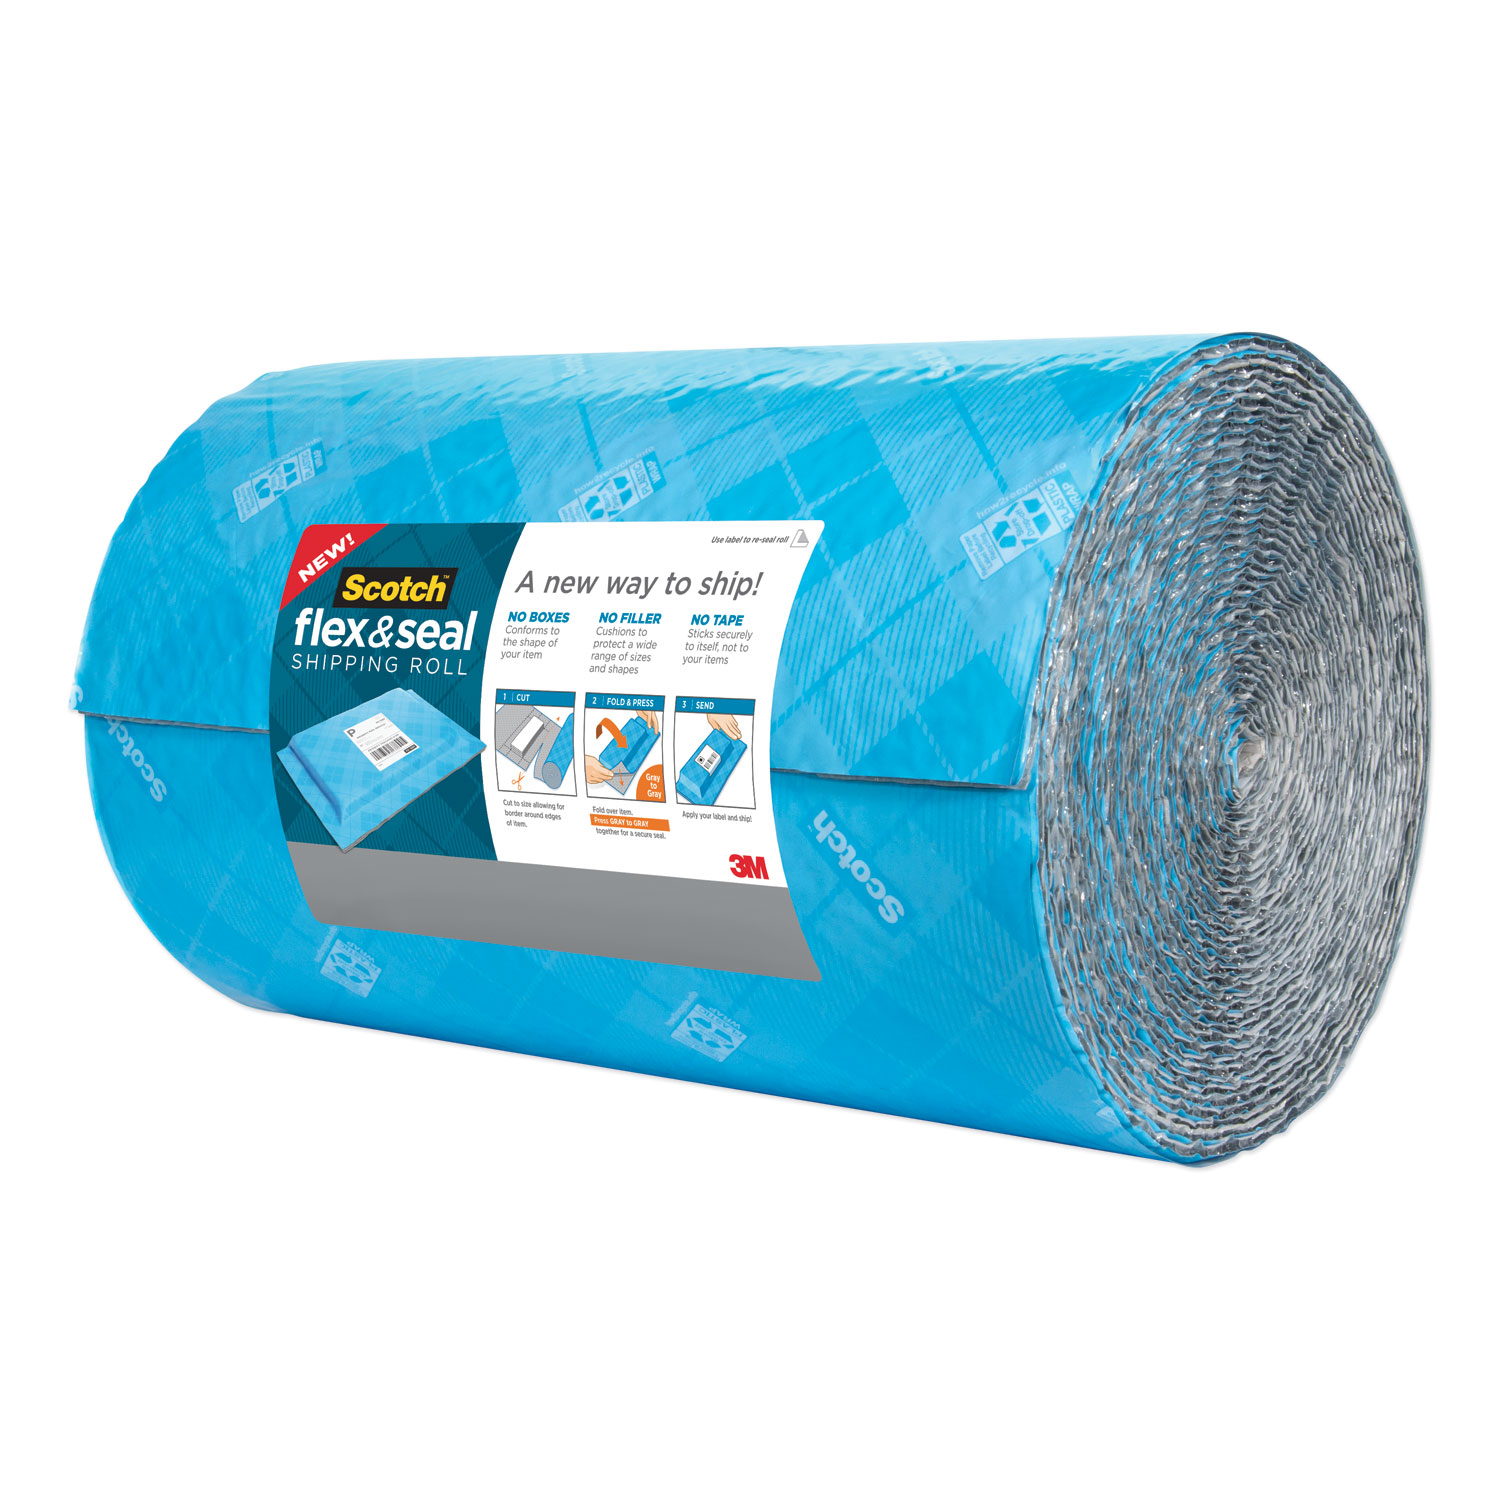 As Easy as Cut Pack of 1 Fold Scotch Flex and Seal Shipping Roll 10 ft x 15 in Press to Securely Seal Packages 